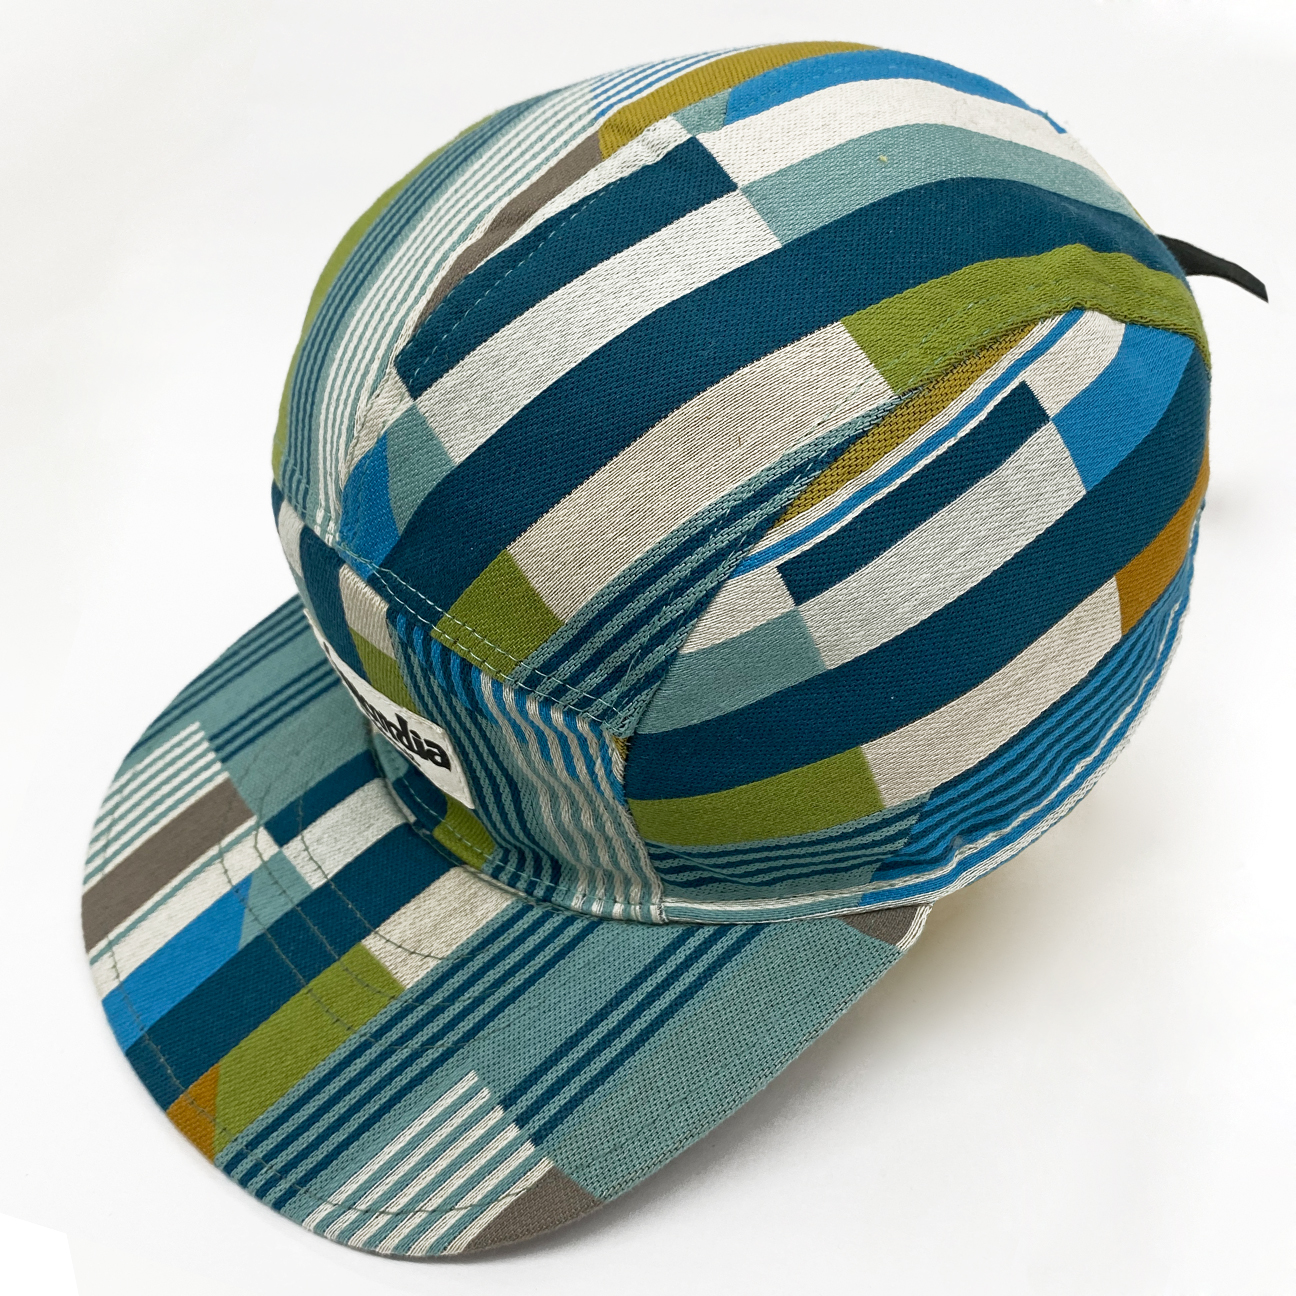 LIMITED EDITION 5-Panel Hat in Multicolor Jacquard – The Choncordia ...